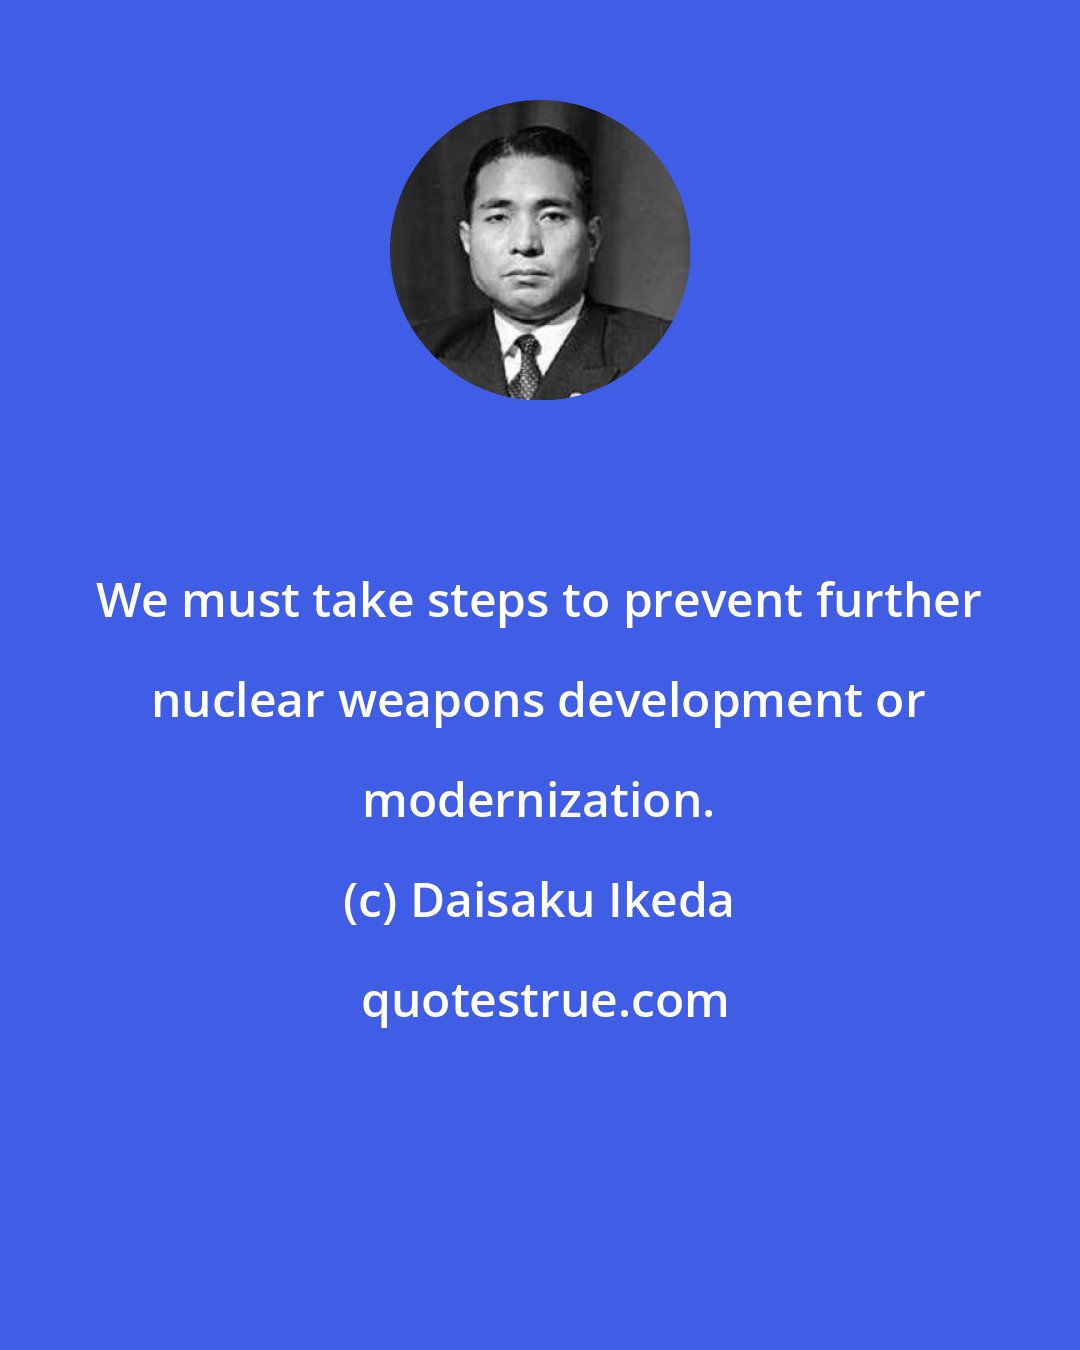 Daisaku Ikeda: We must take steps to prevent further nuclear weapons development or modernization.